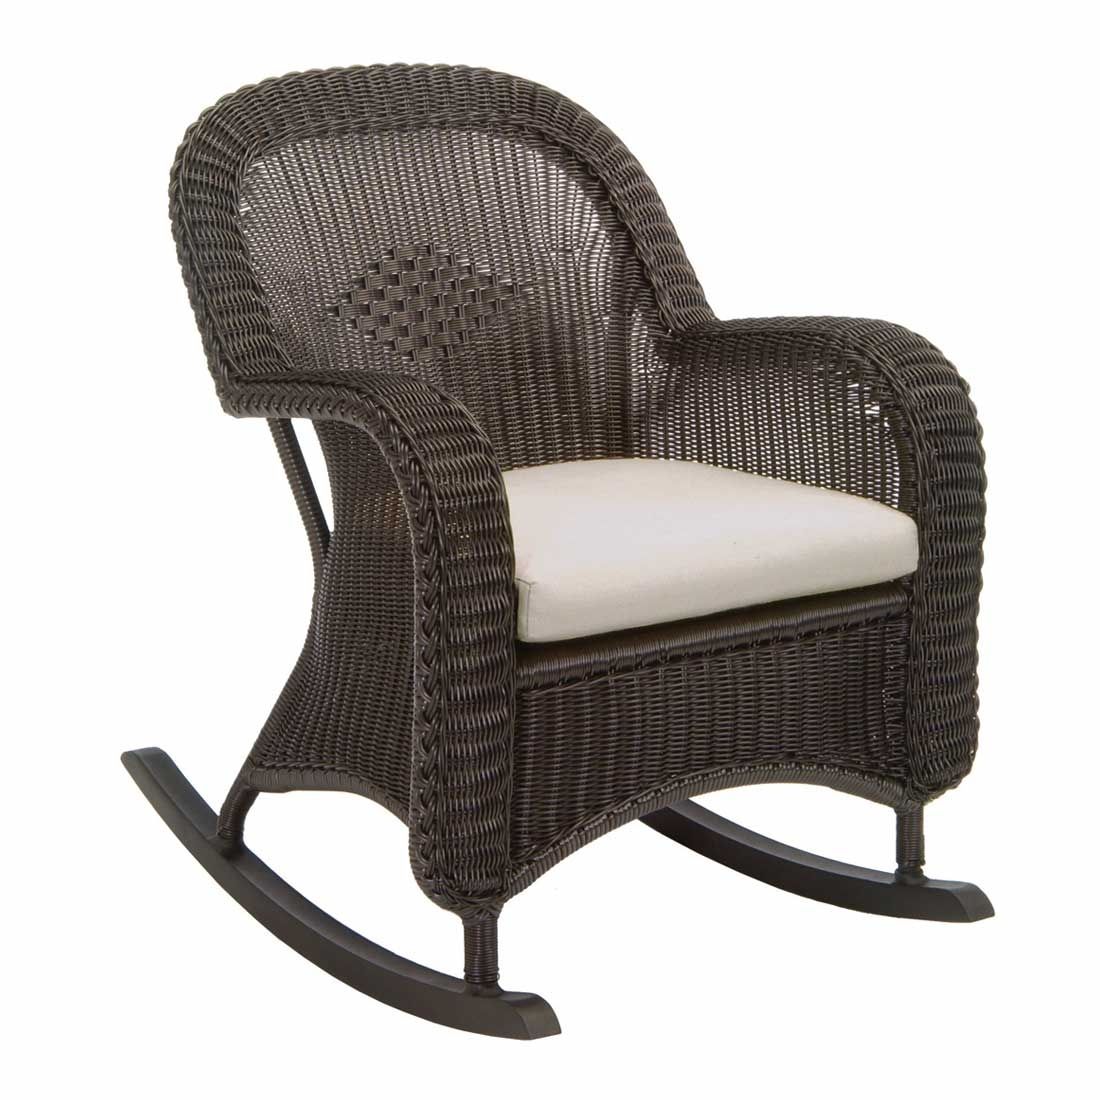 15 Best Collection of Wicker Rocking Chairs for Outdoors